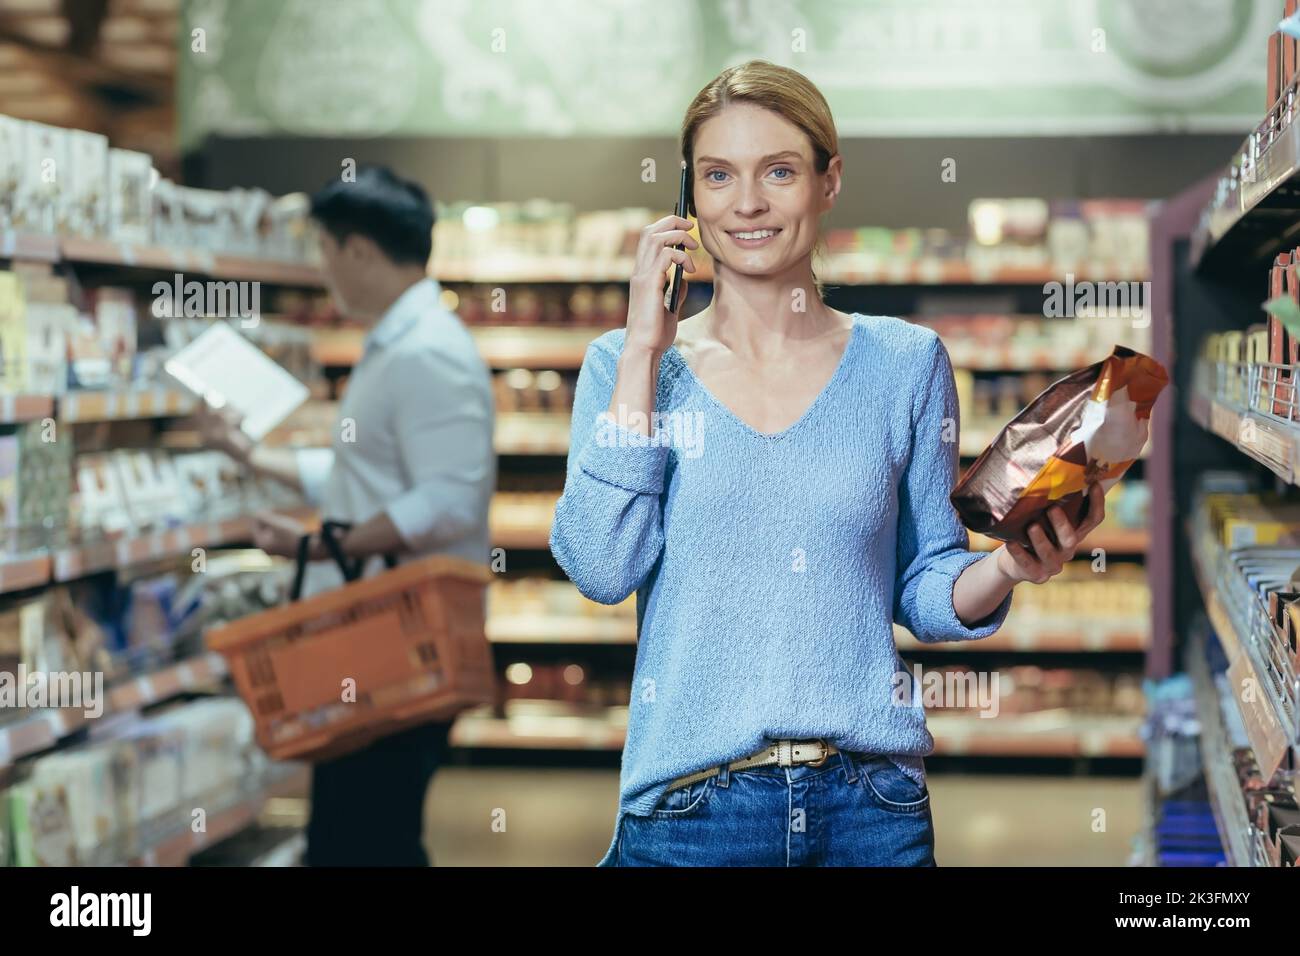 A beautiful young blonde woman is standing in a supermarket and talking on the phone, consulting, holding a pack of coffee in her hand, smiling. Shoppers in the background. Stock Photo